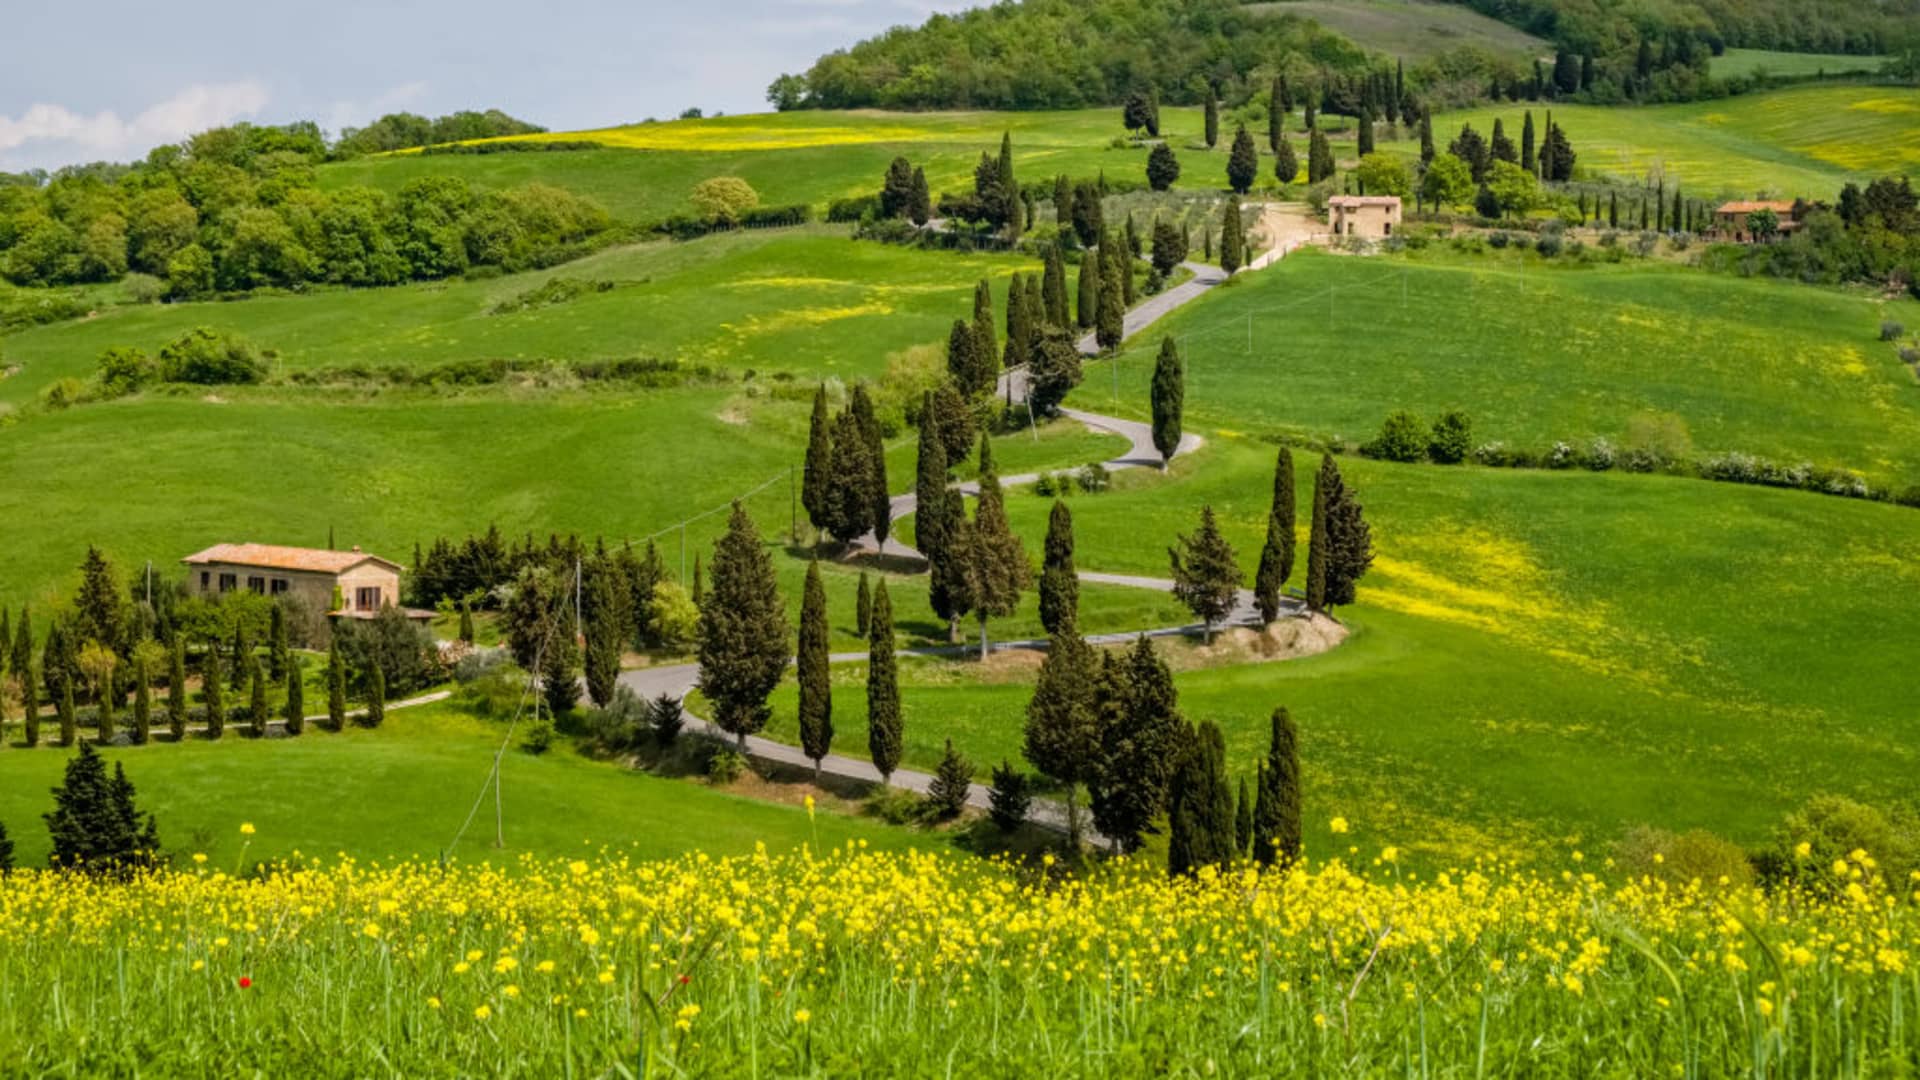 With 55 in all, Italy is tied with China for having the most UNESCO World Heritage Sites, though not all are crawling with tourists, such as the rural landscape of Tuscany's Val d'Orcia.